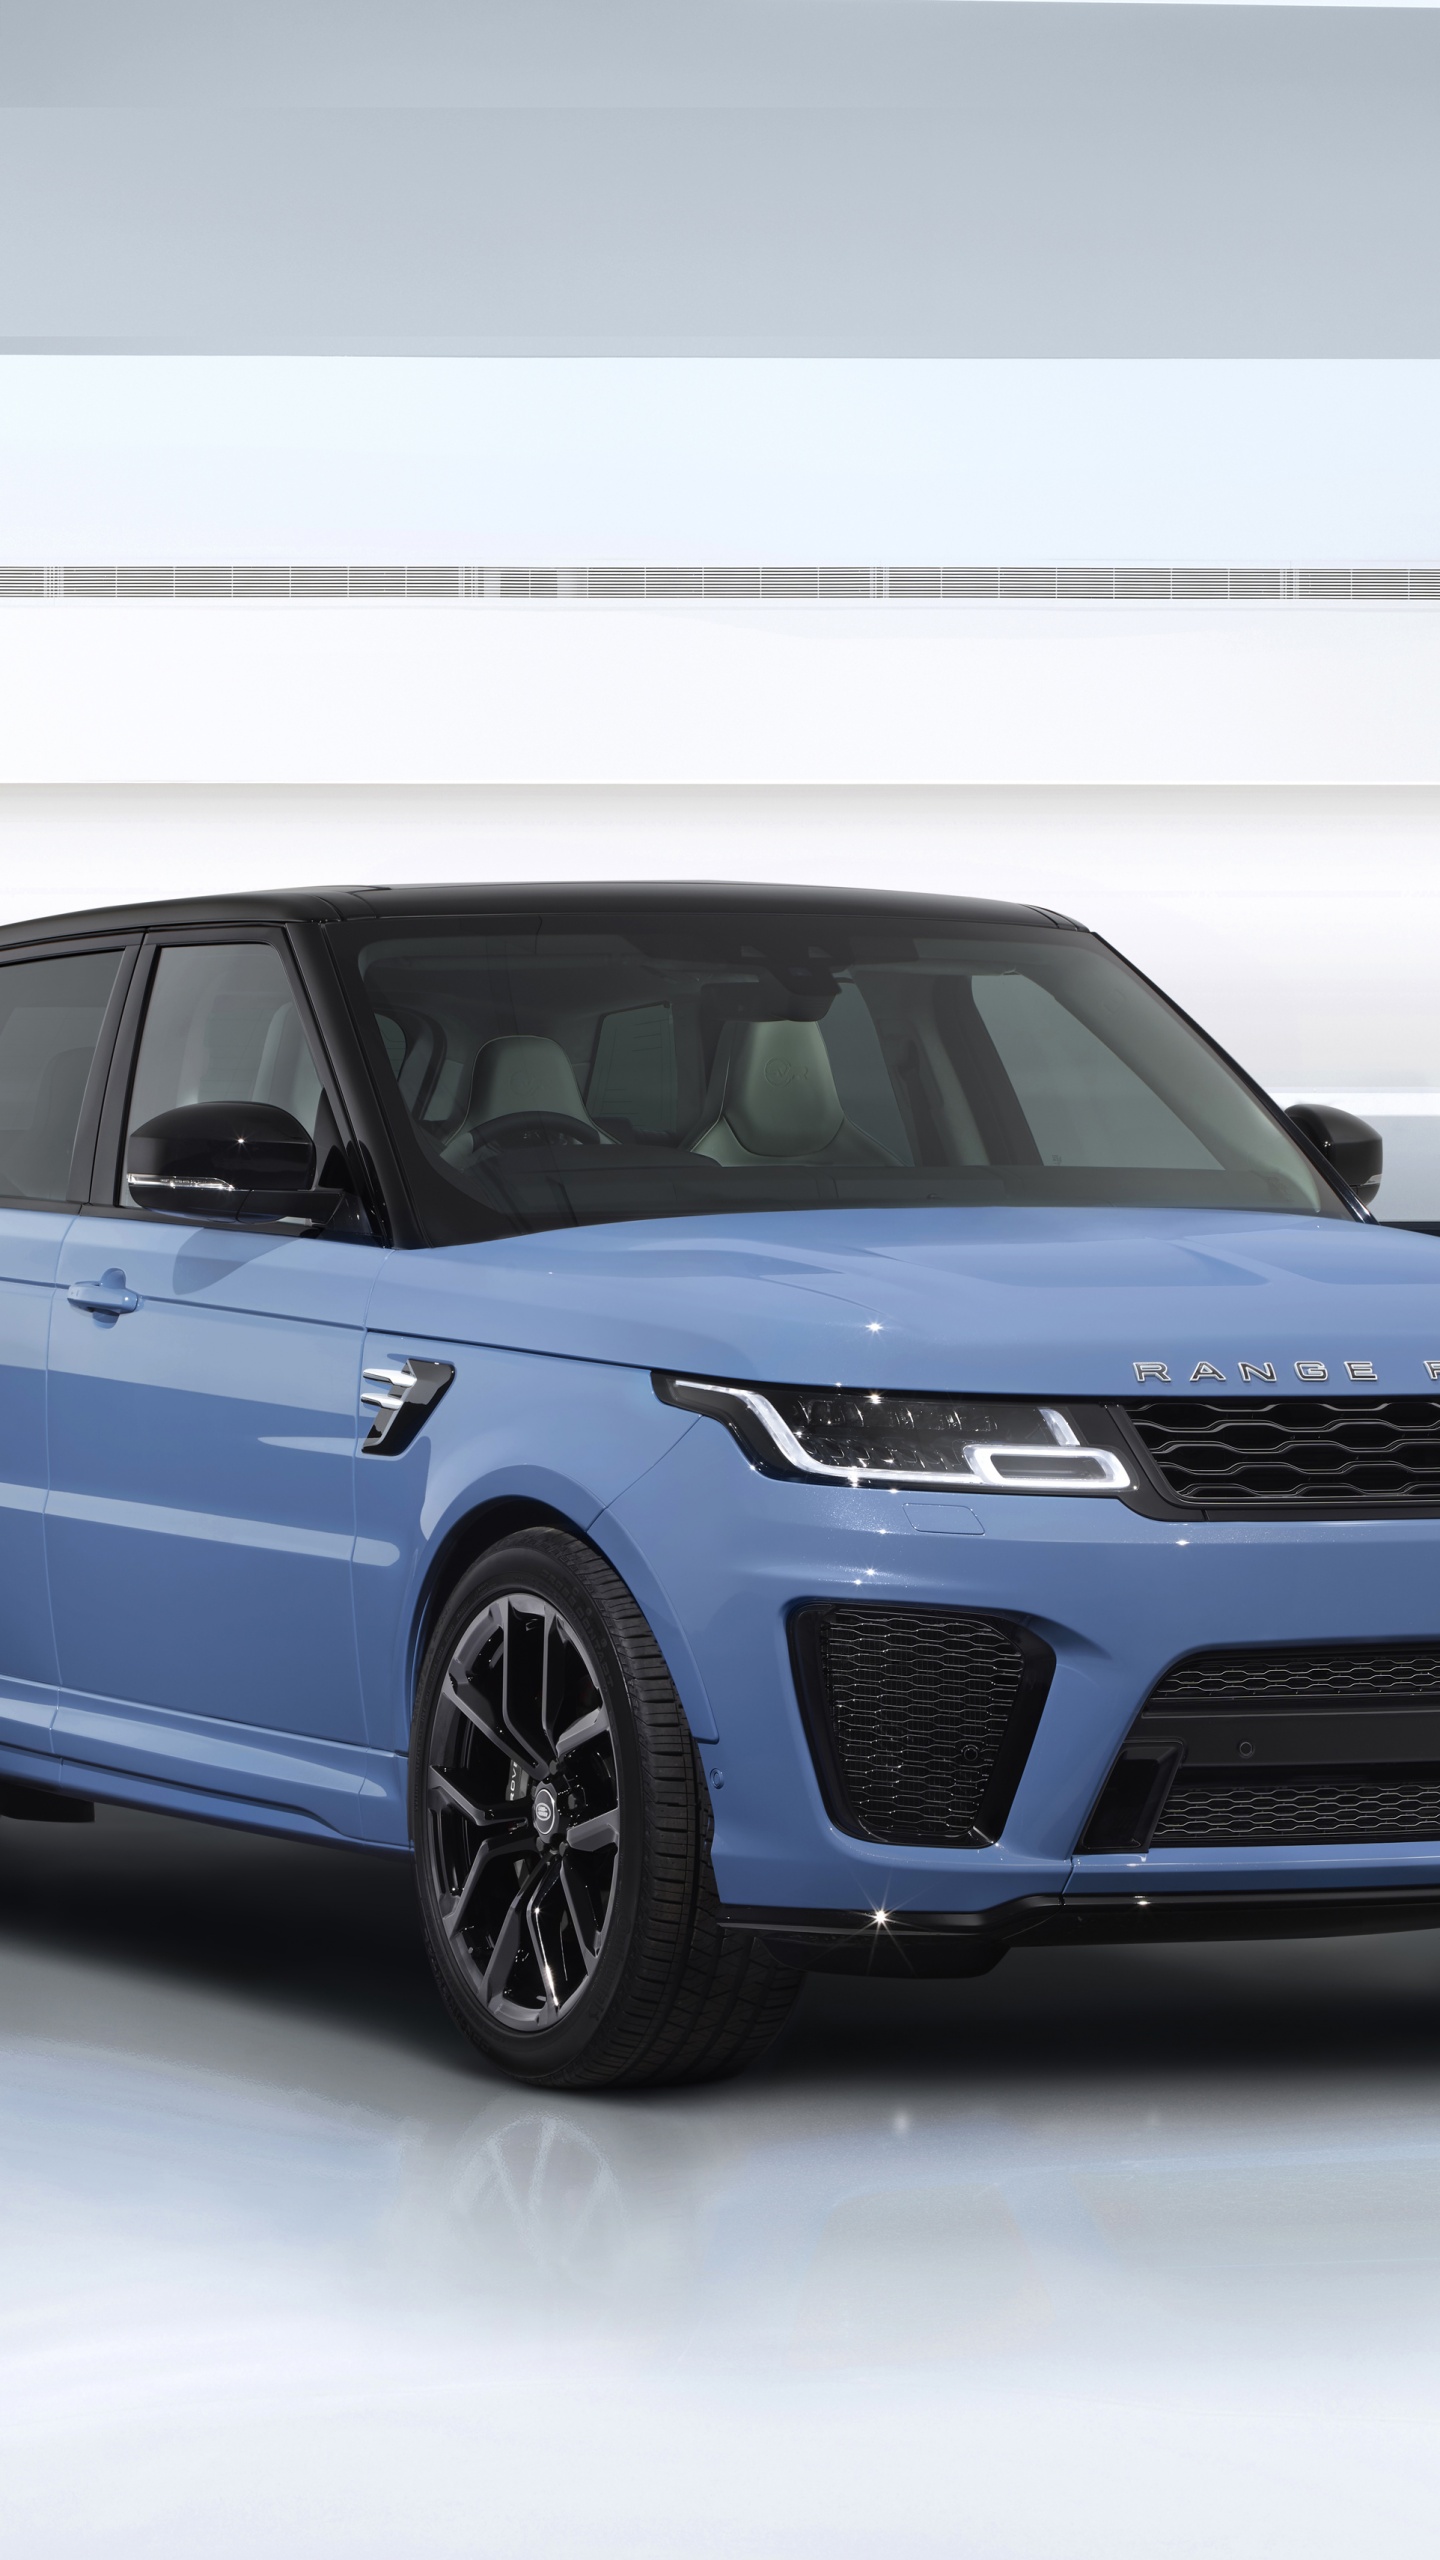 Range Rover Photos Download The BEST Free Range Rover Stock Photos  HD  Images